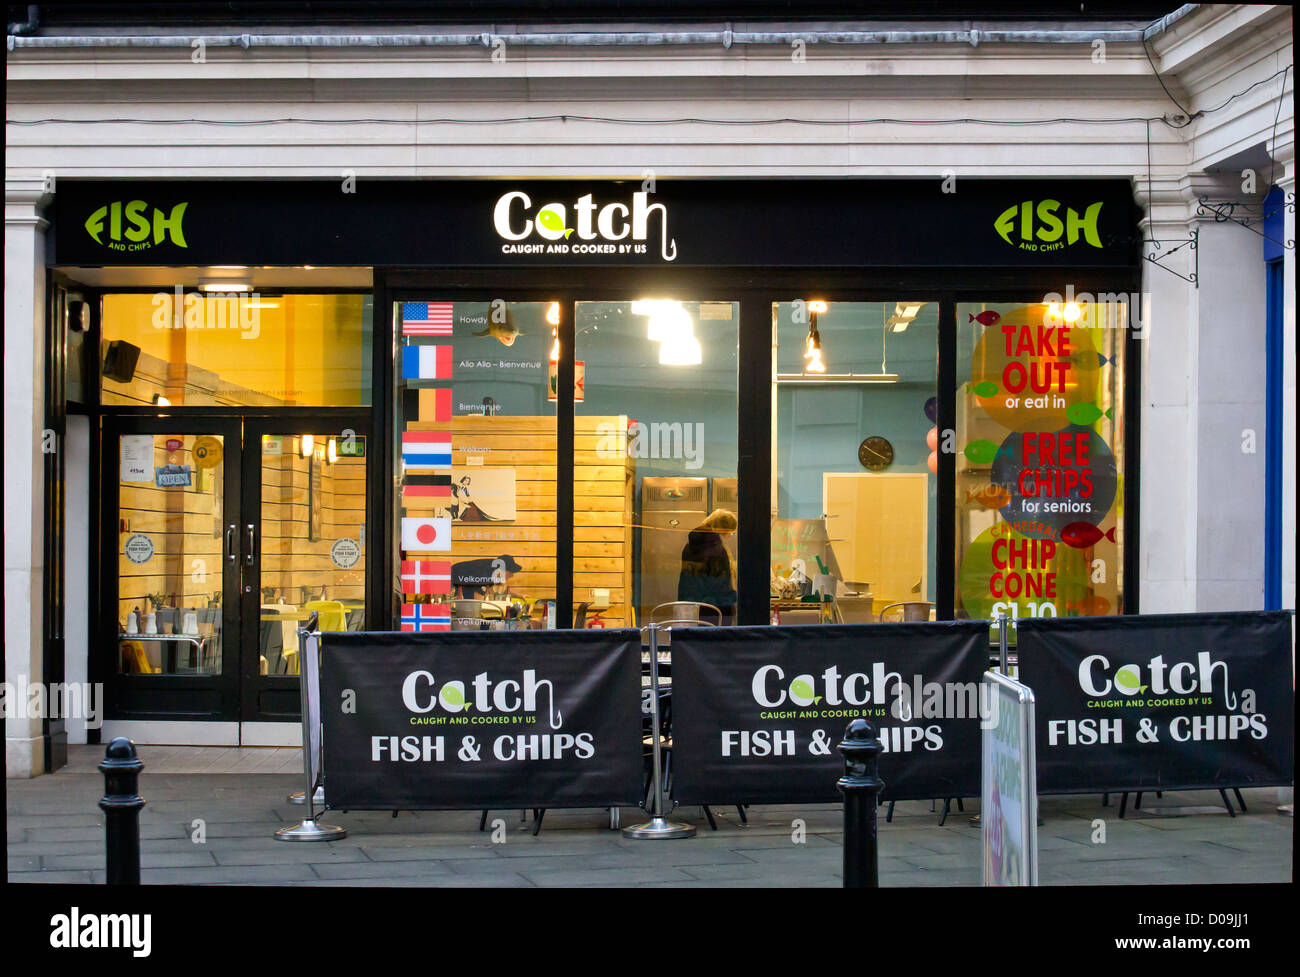 Catch Fish and Chip Restaurant Canterbury England Fish & Chips Stock Photo